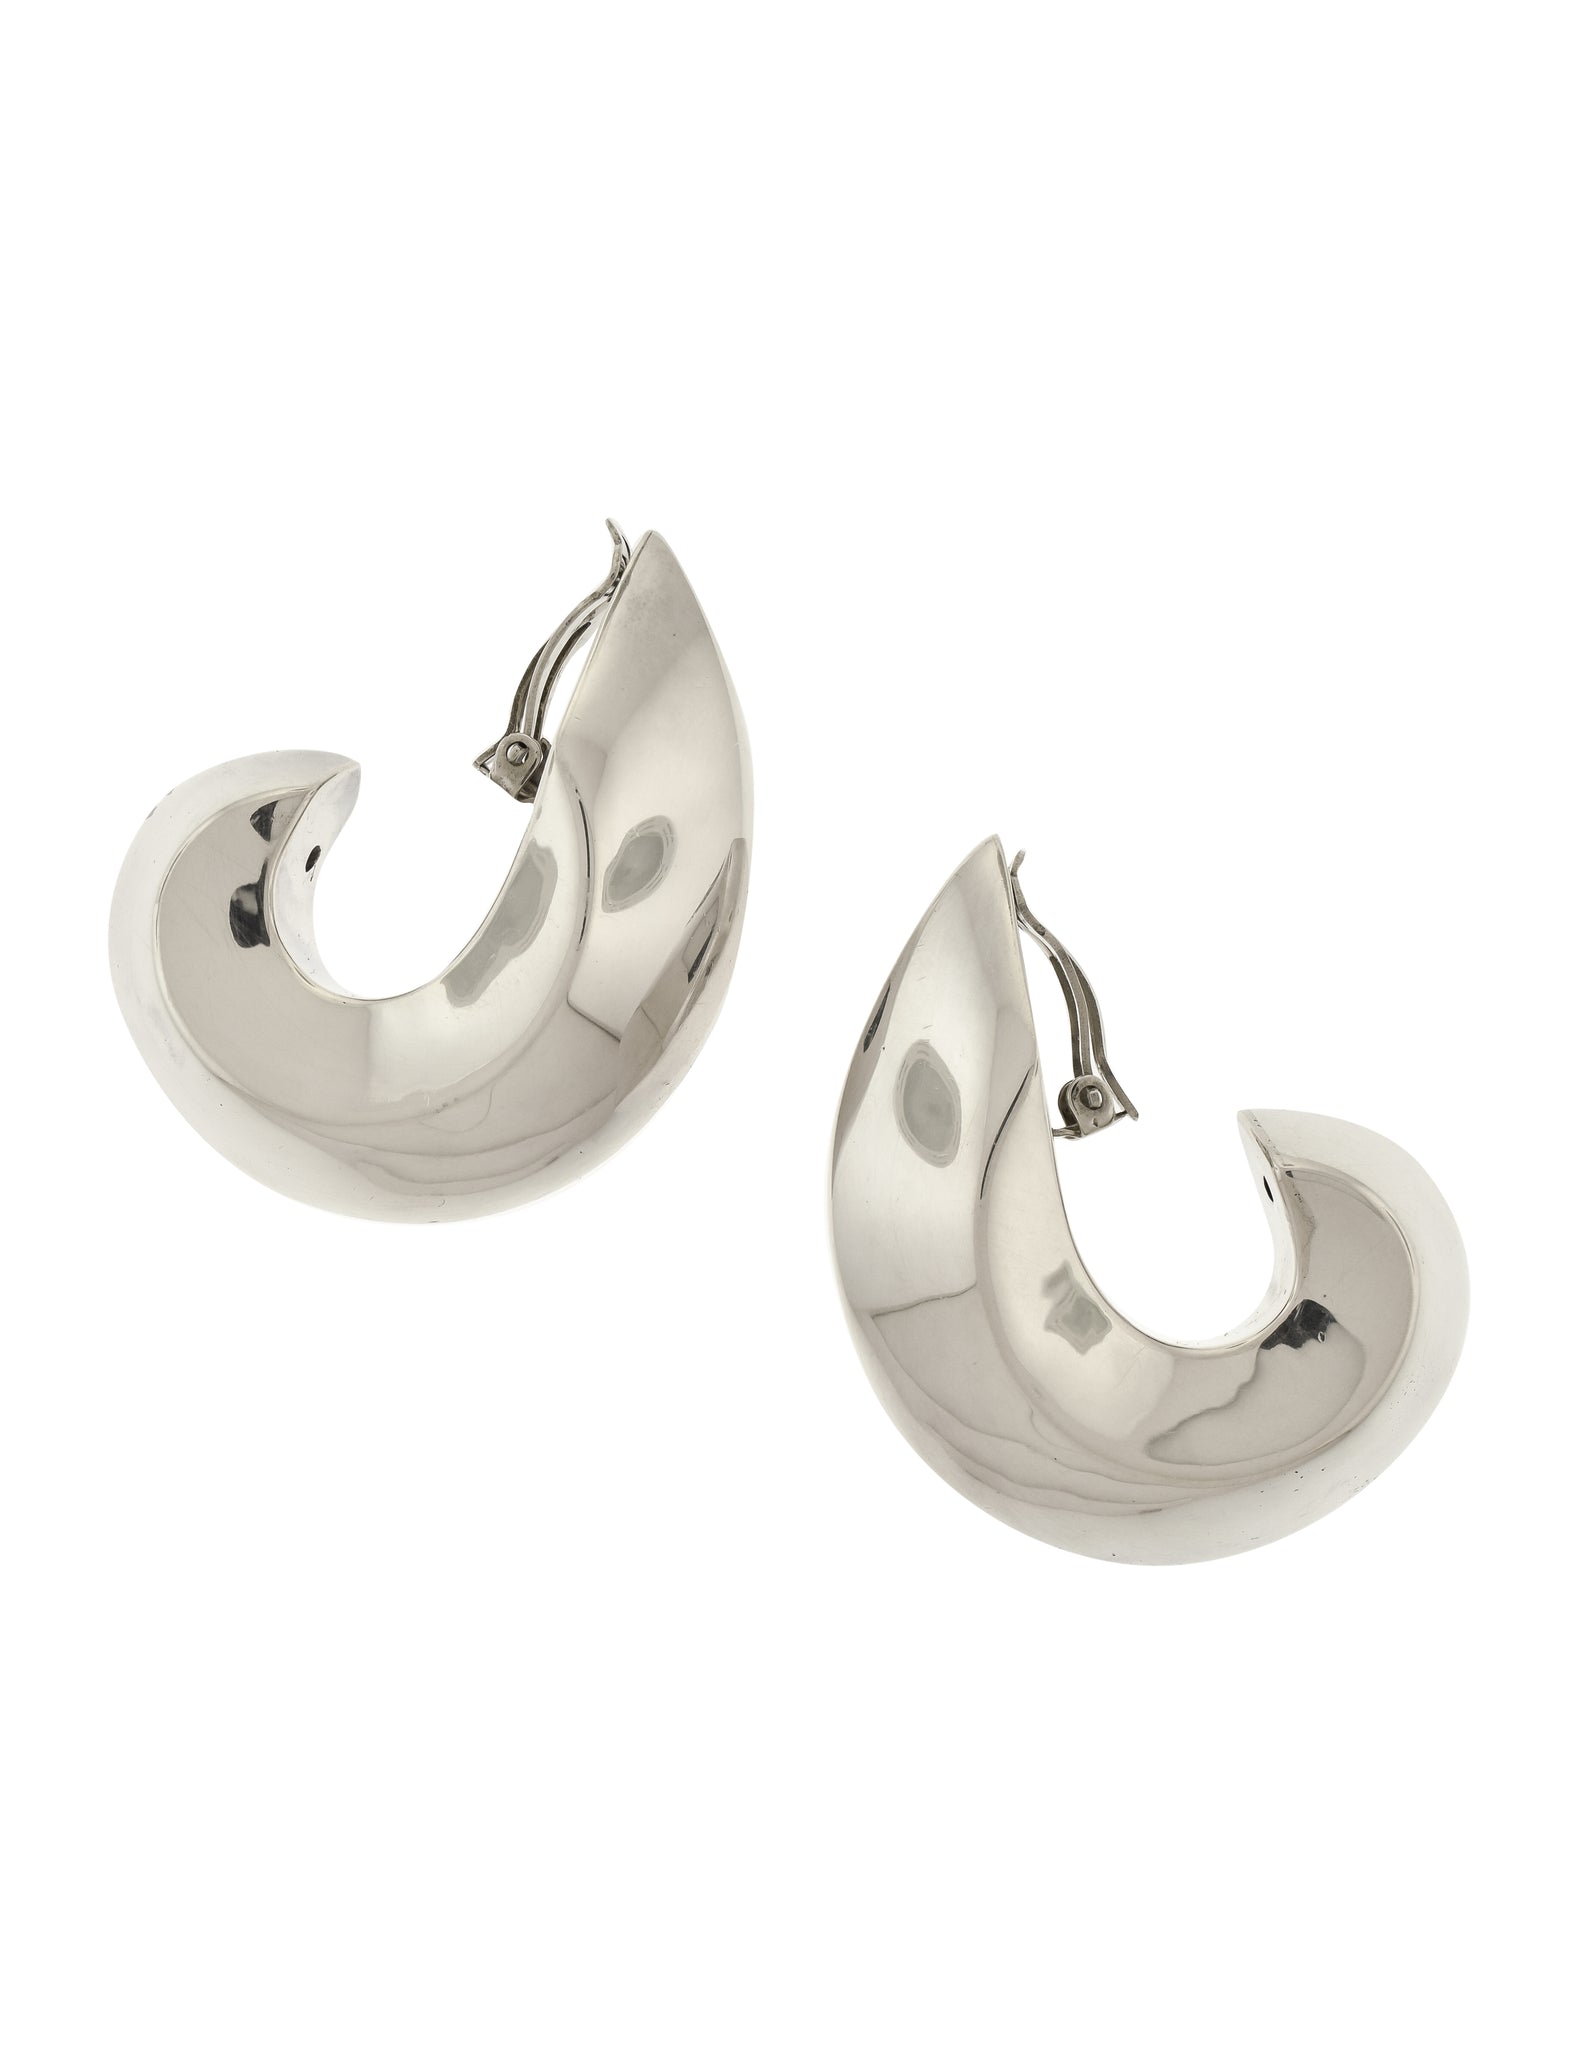 Patricia von Musulin Vintage Iconic Massive Oversized Sterling Silver 'Fishhook' Earrings